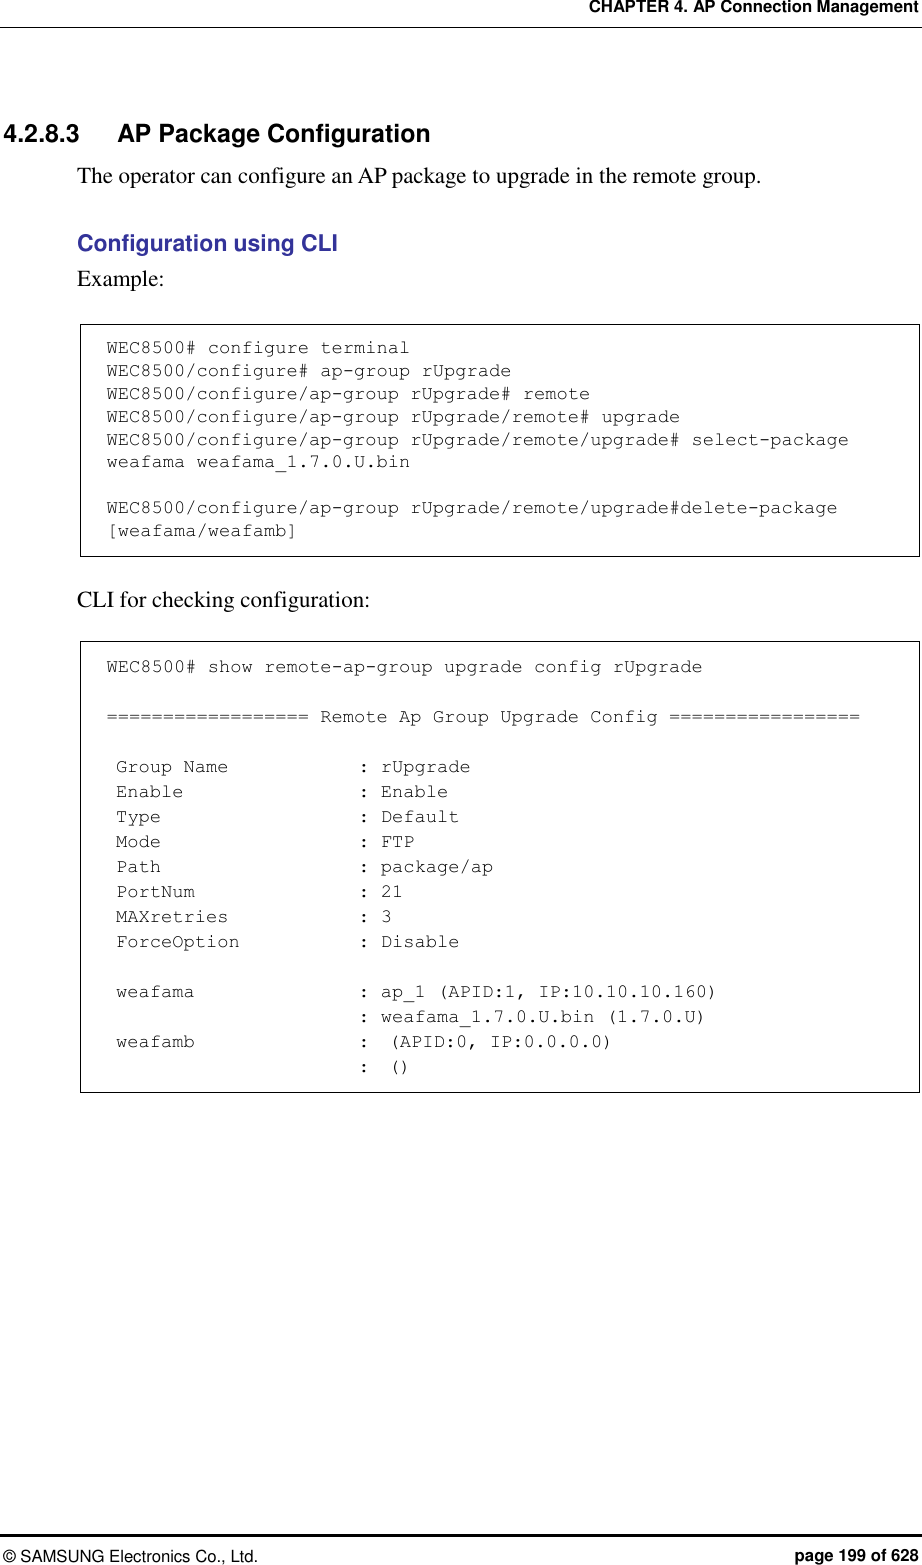 CHAPTER 4. AP Connection Management ©  SAMSUNG Electronics Co., Ltd.  page 199 of 628 4.2.8.3  AP Package Configuration The operator can configure an AP package to upgrade in the remote group.  Configuration using CLI   Example:  WEC8500# configure terminal WEC8500/configure# ap-group rUpgrade WEC8500/configure/ap-group rUpgrade# remote WEC8500/configure/ap-group rUpgrade/remote# upgrade WEC8500/configure/ap-group rUpgrade/remote/upgrade# select-package weafama weafama_1.7.0.U.bin  WEC8500/configure/ap-group rUpgrade/remote/upgrade#delete-package [weafama/weafamb]  CLI for checking configuration:  WEC8500# show remote-ap-group upgrade config rUpgrade  ================== Remote Ap Group Upgrade Config =================   Group Name              : rUpgrade  Enable                   : Enable  Type                      : Default  Mode                      : FTP  Path                      : package/ap  PortNum                  : 21  MAXretries              : 3  ForceOption             : Disable   weafama                  : ap_1 (APID:1, IP:10.10.10.160)                            : weafama_1.7.0.U.bin (1.7.0.U)  weafamb                  :  (APID:0, IP:0.0.0.0)                            :  ()  